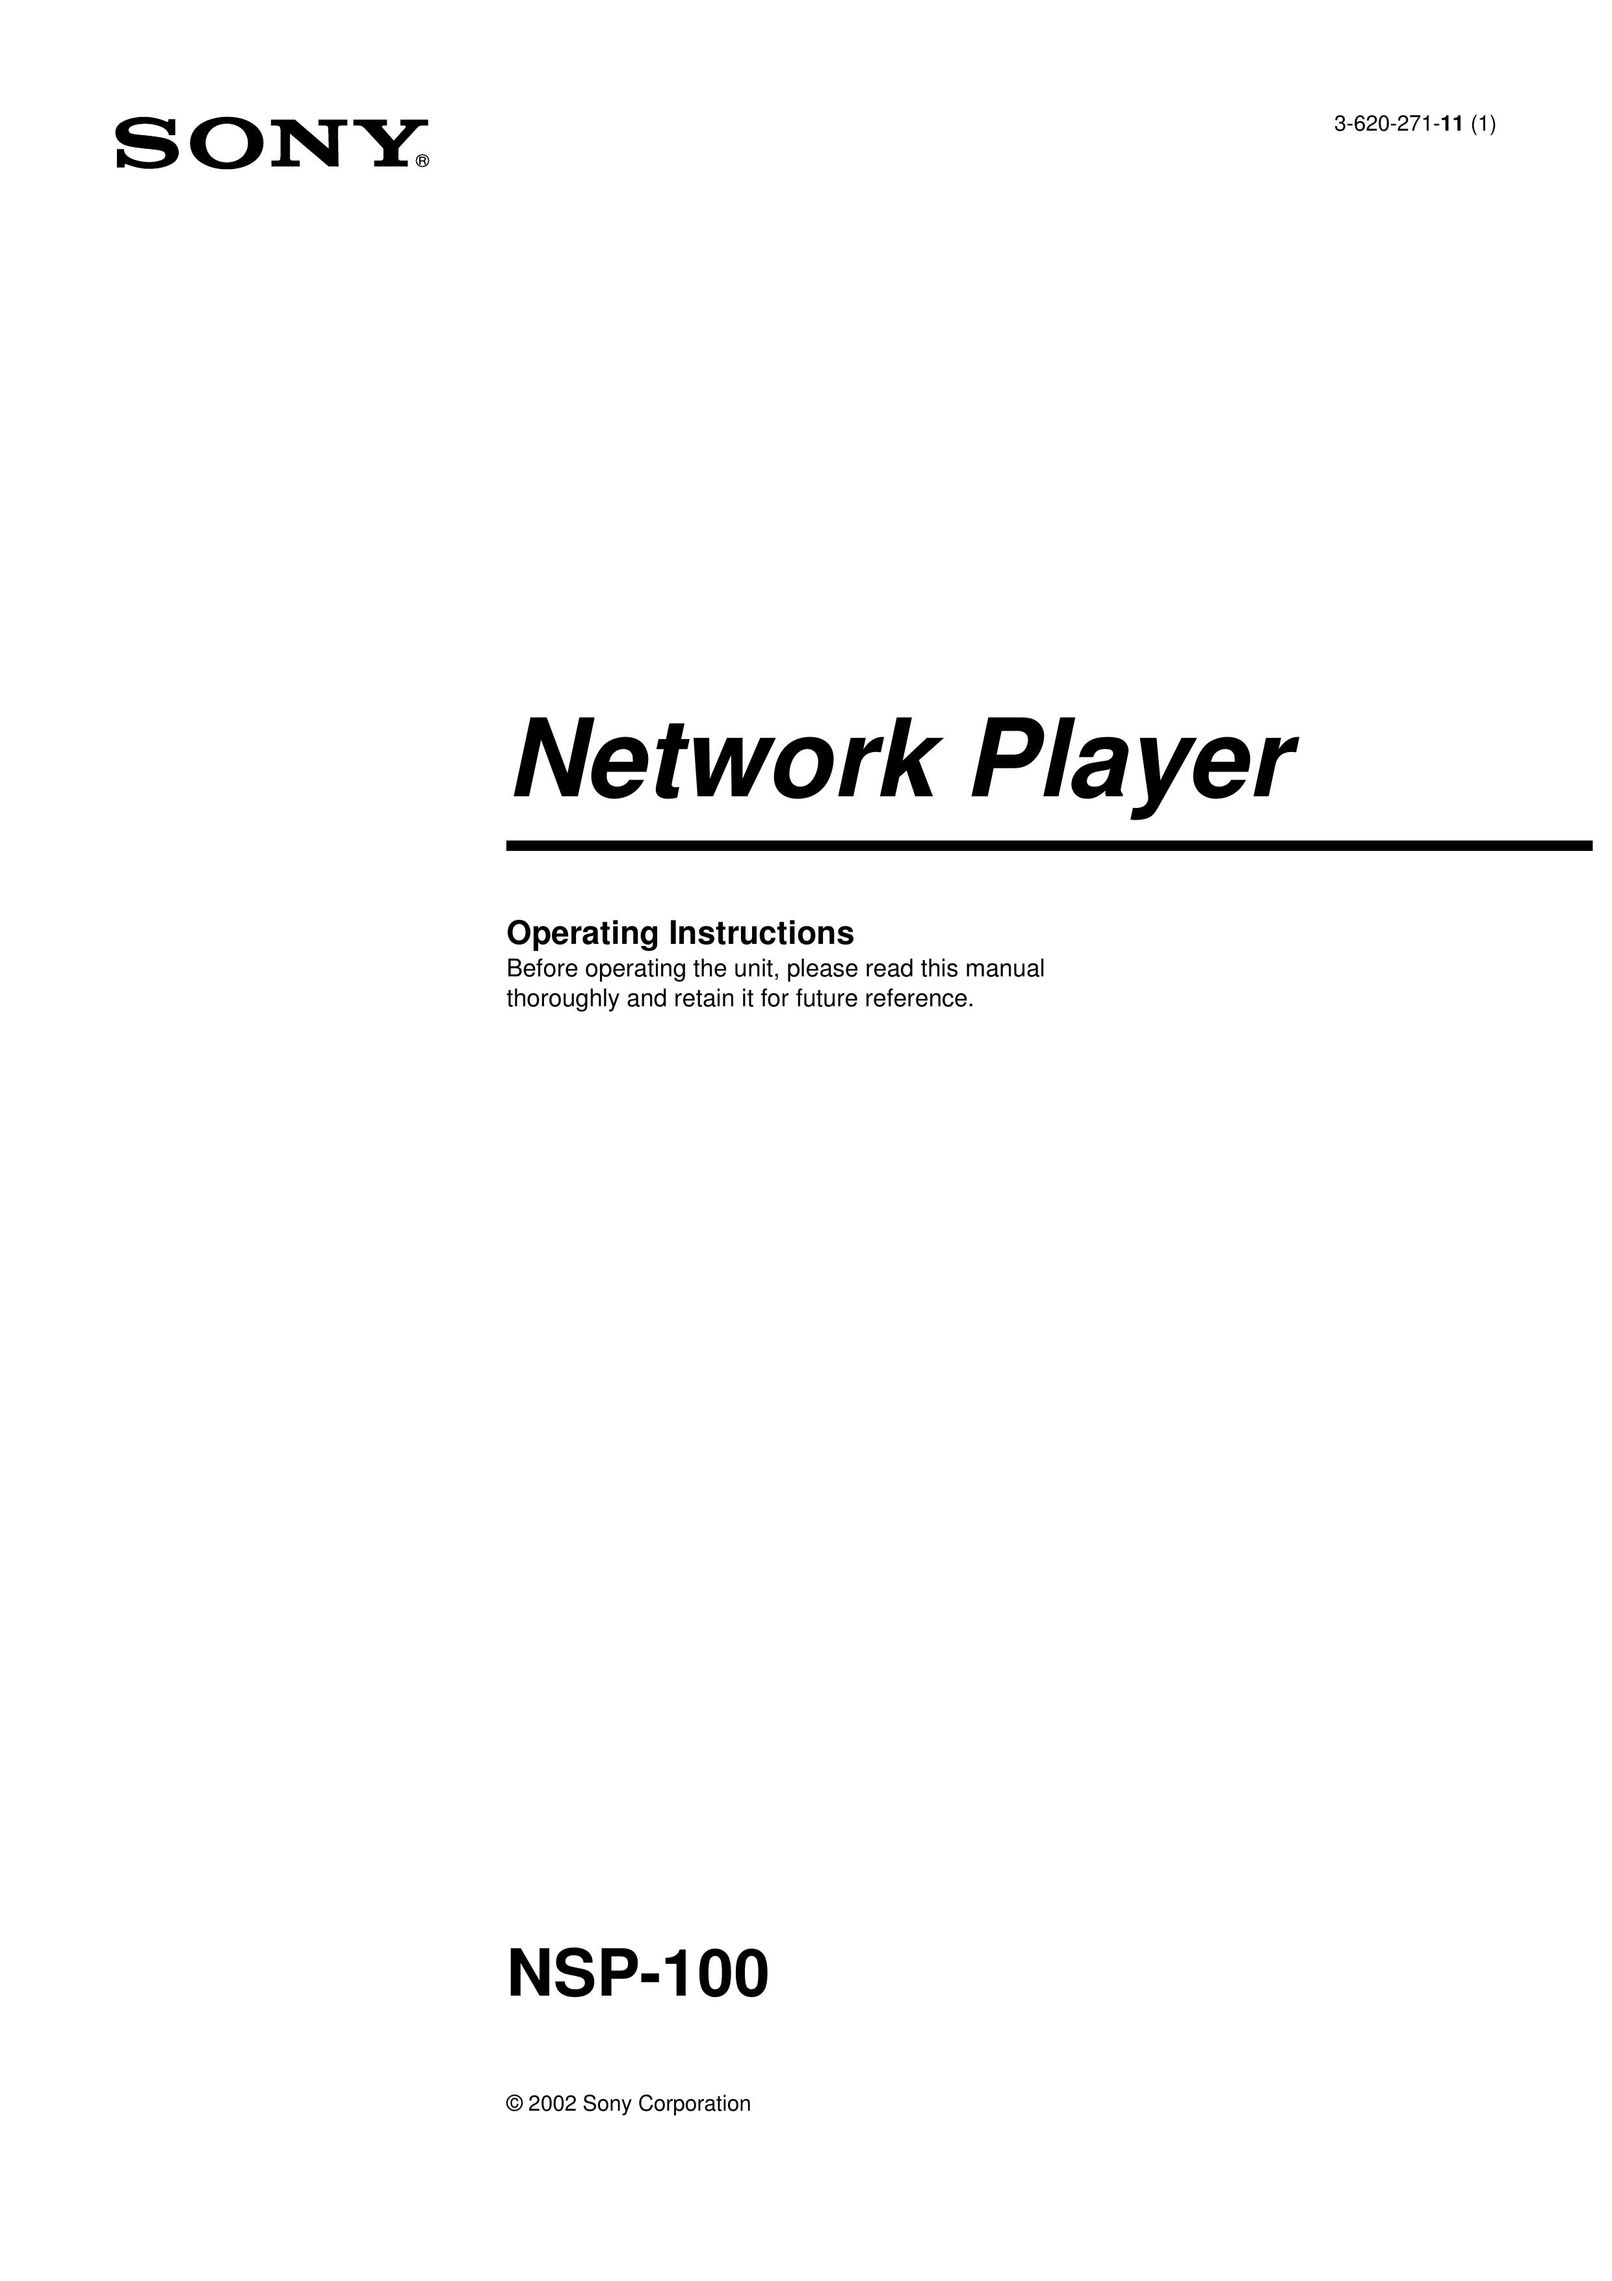 Sony NSP-100 Network Router User Manual